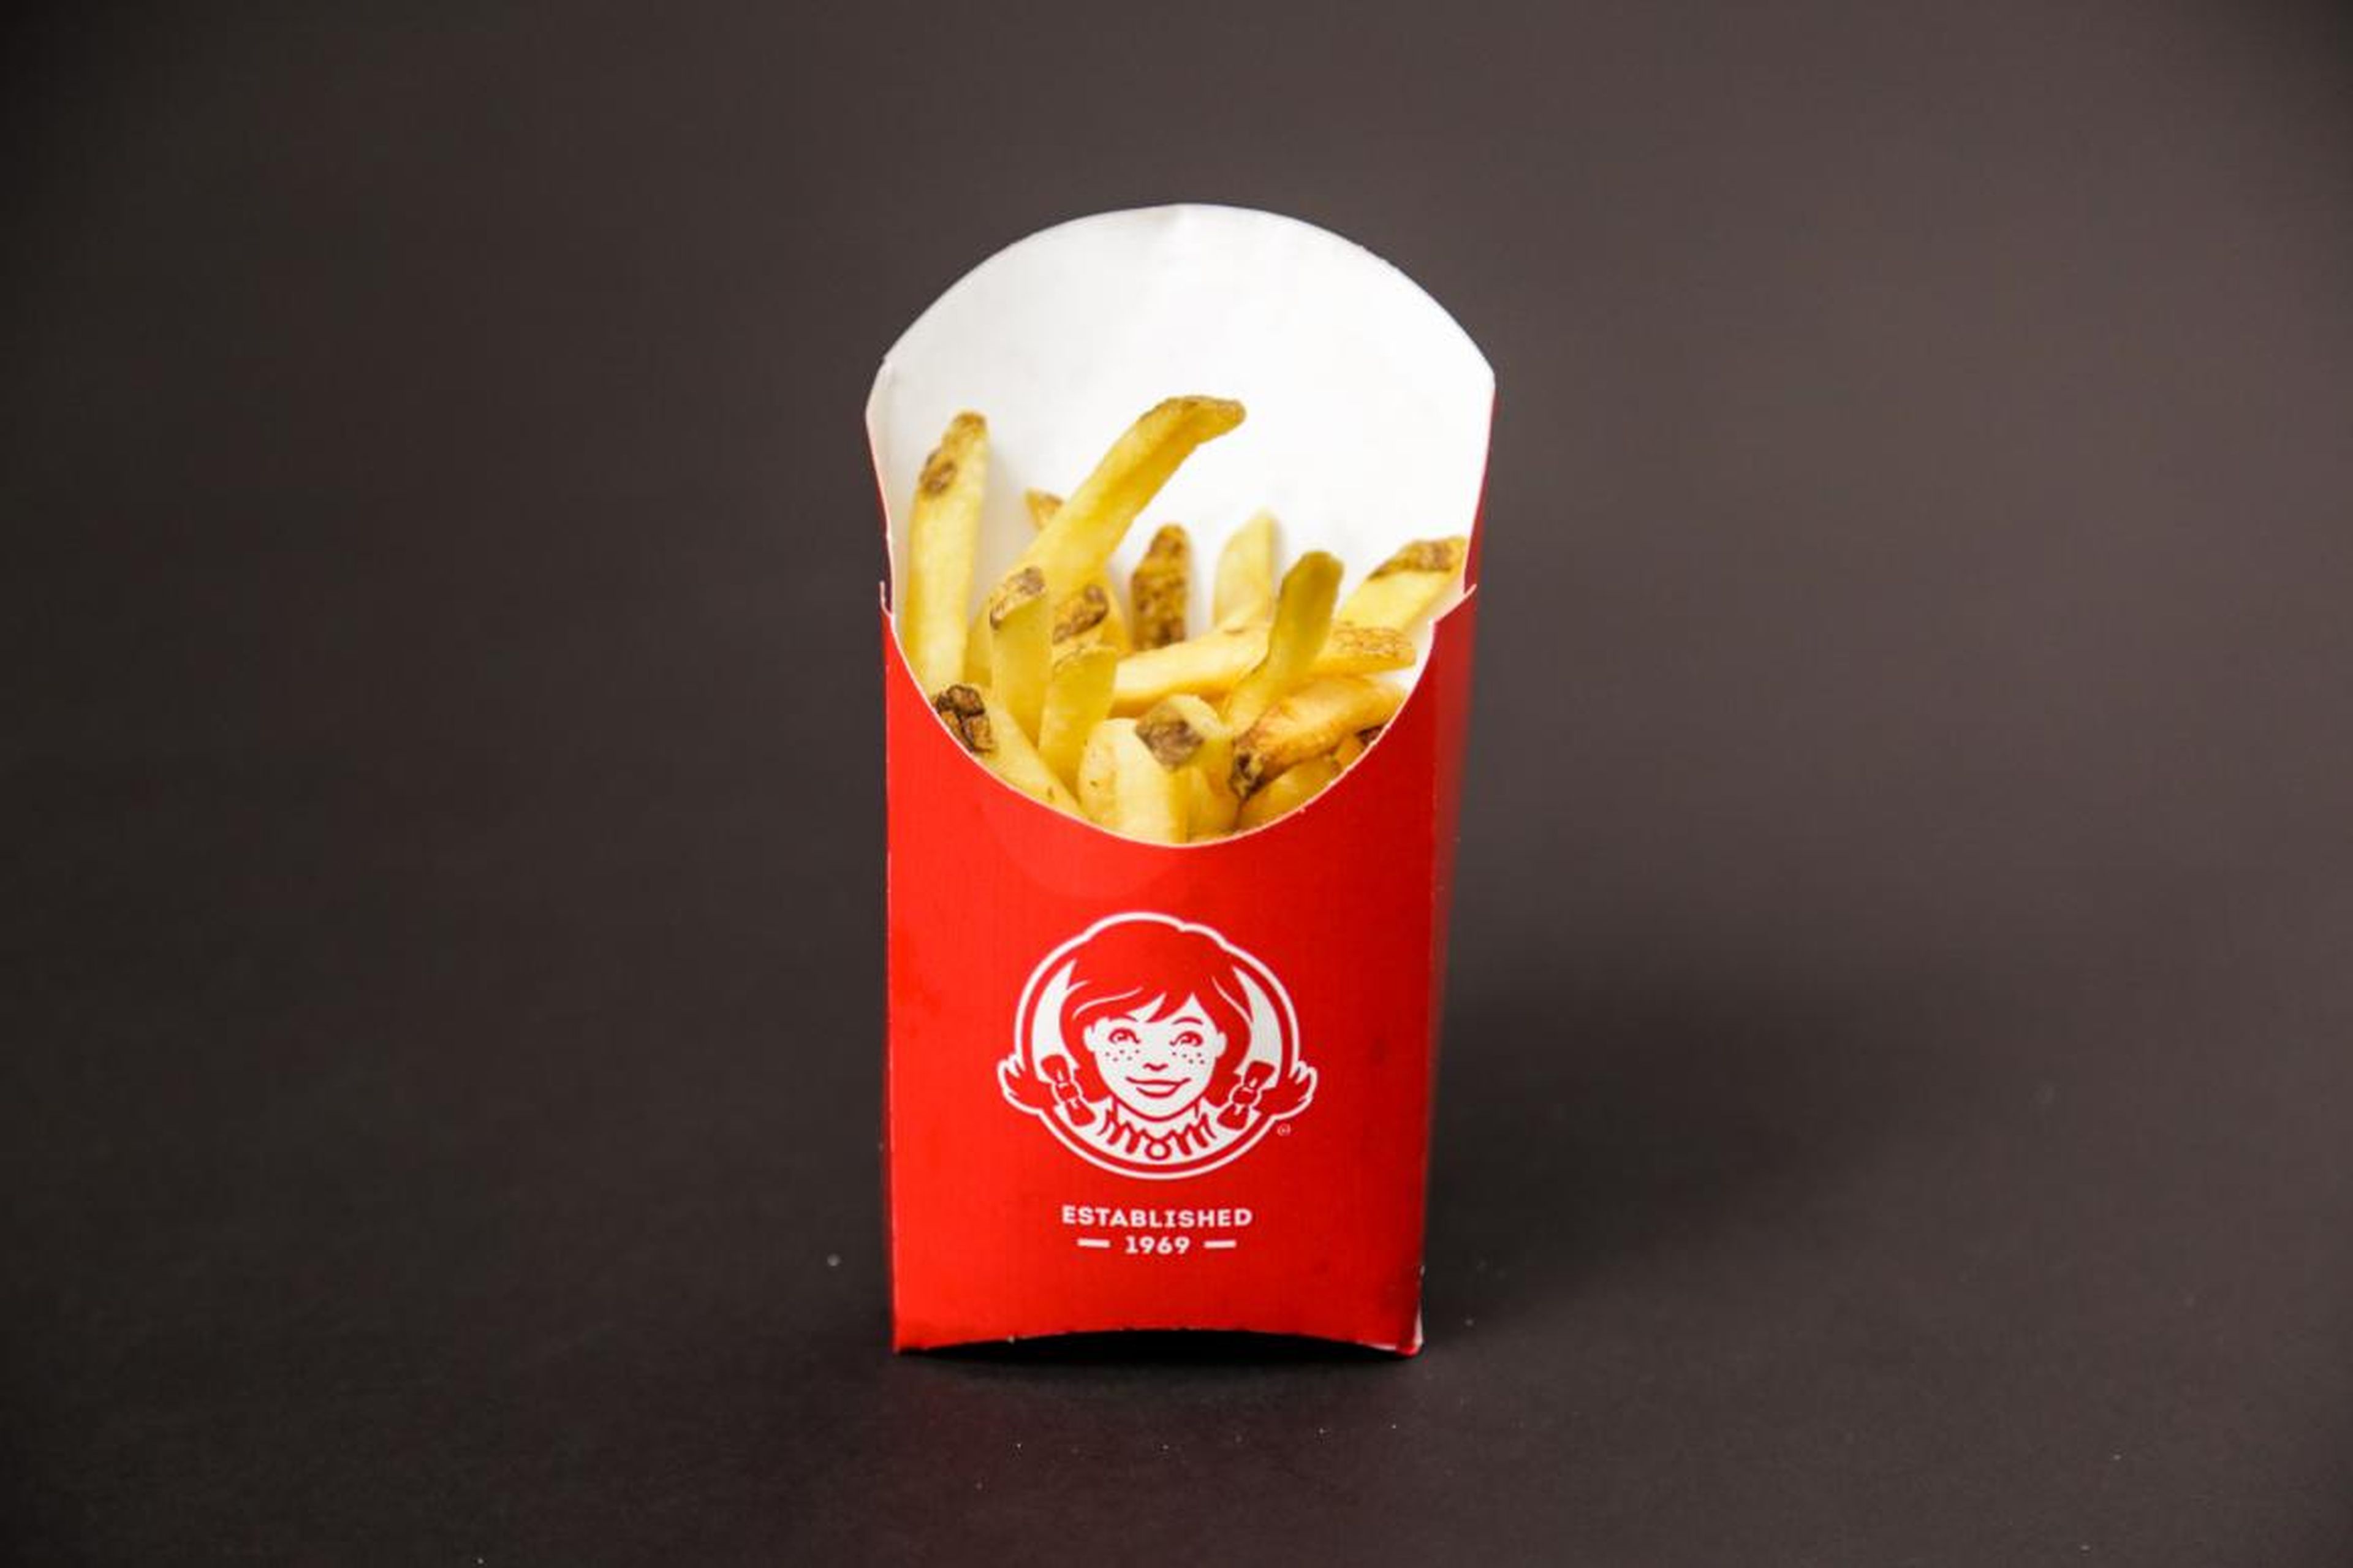 With a taste somewhere between a McDonald's fry and a Five Guys fry, the Wendy's champion has steadfast allies.